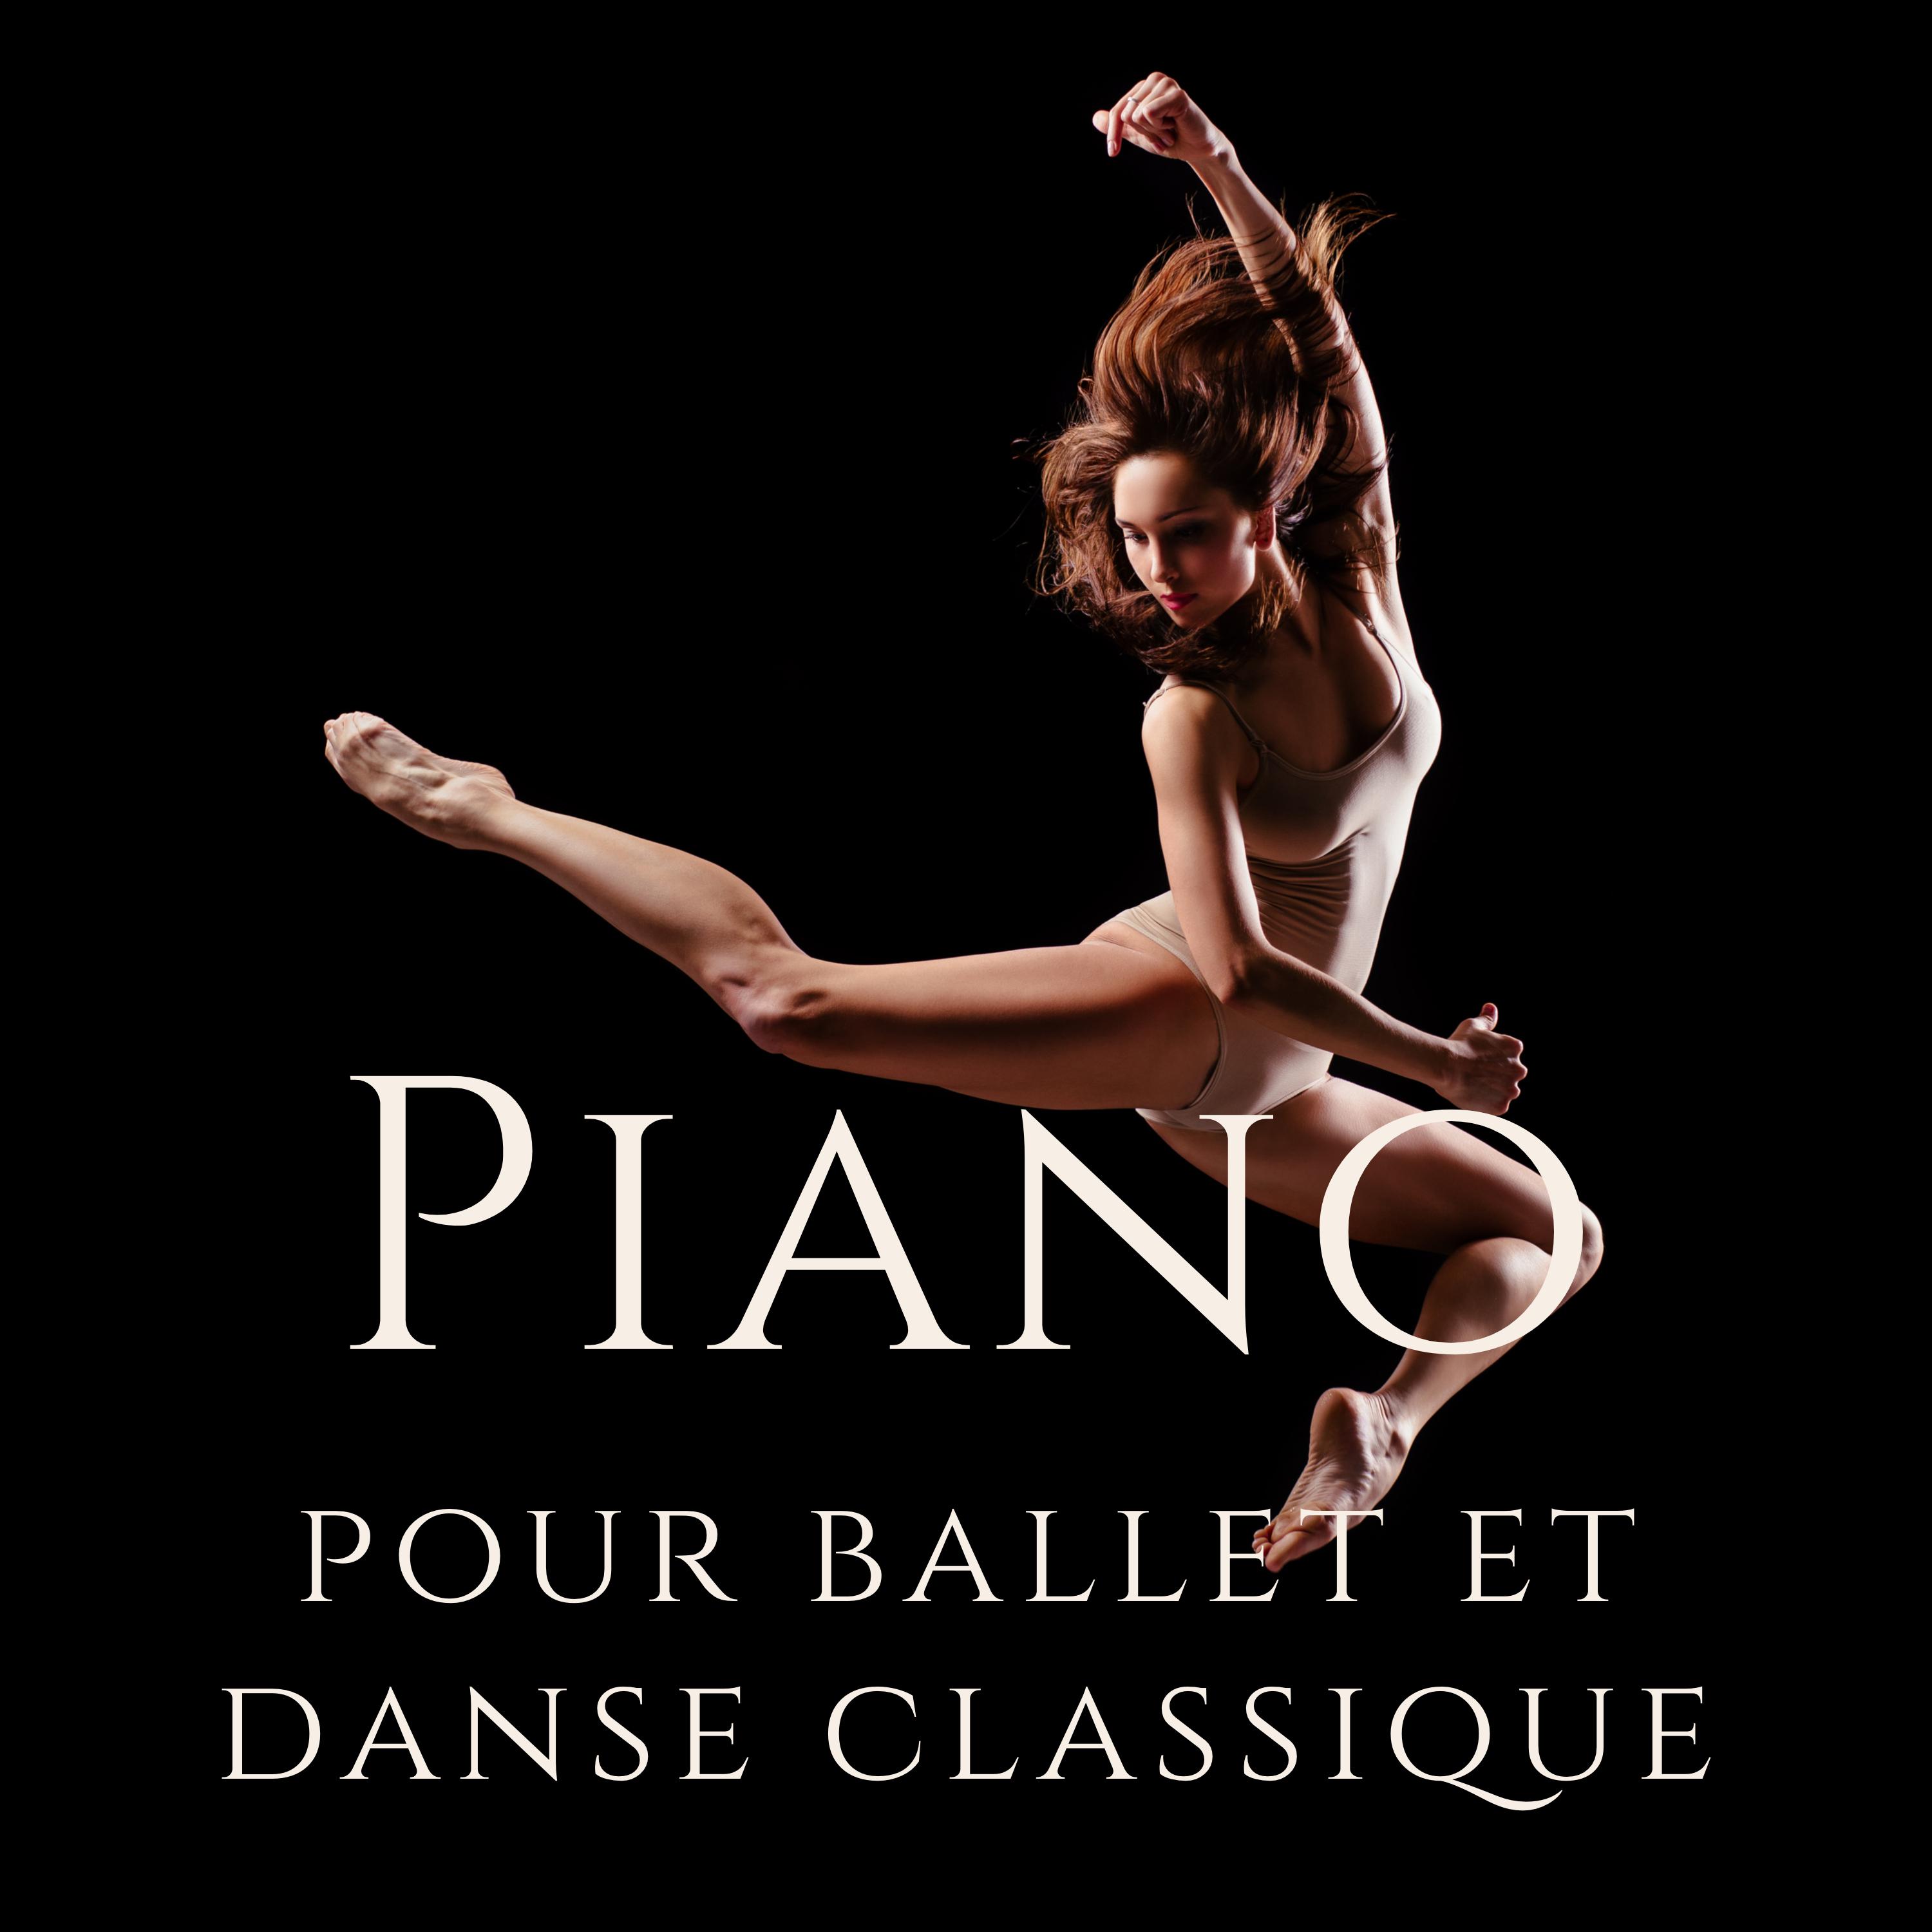 Piano for ballet